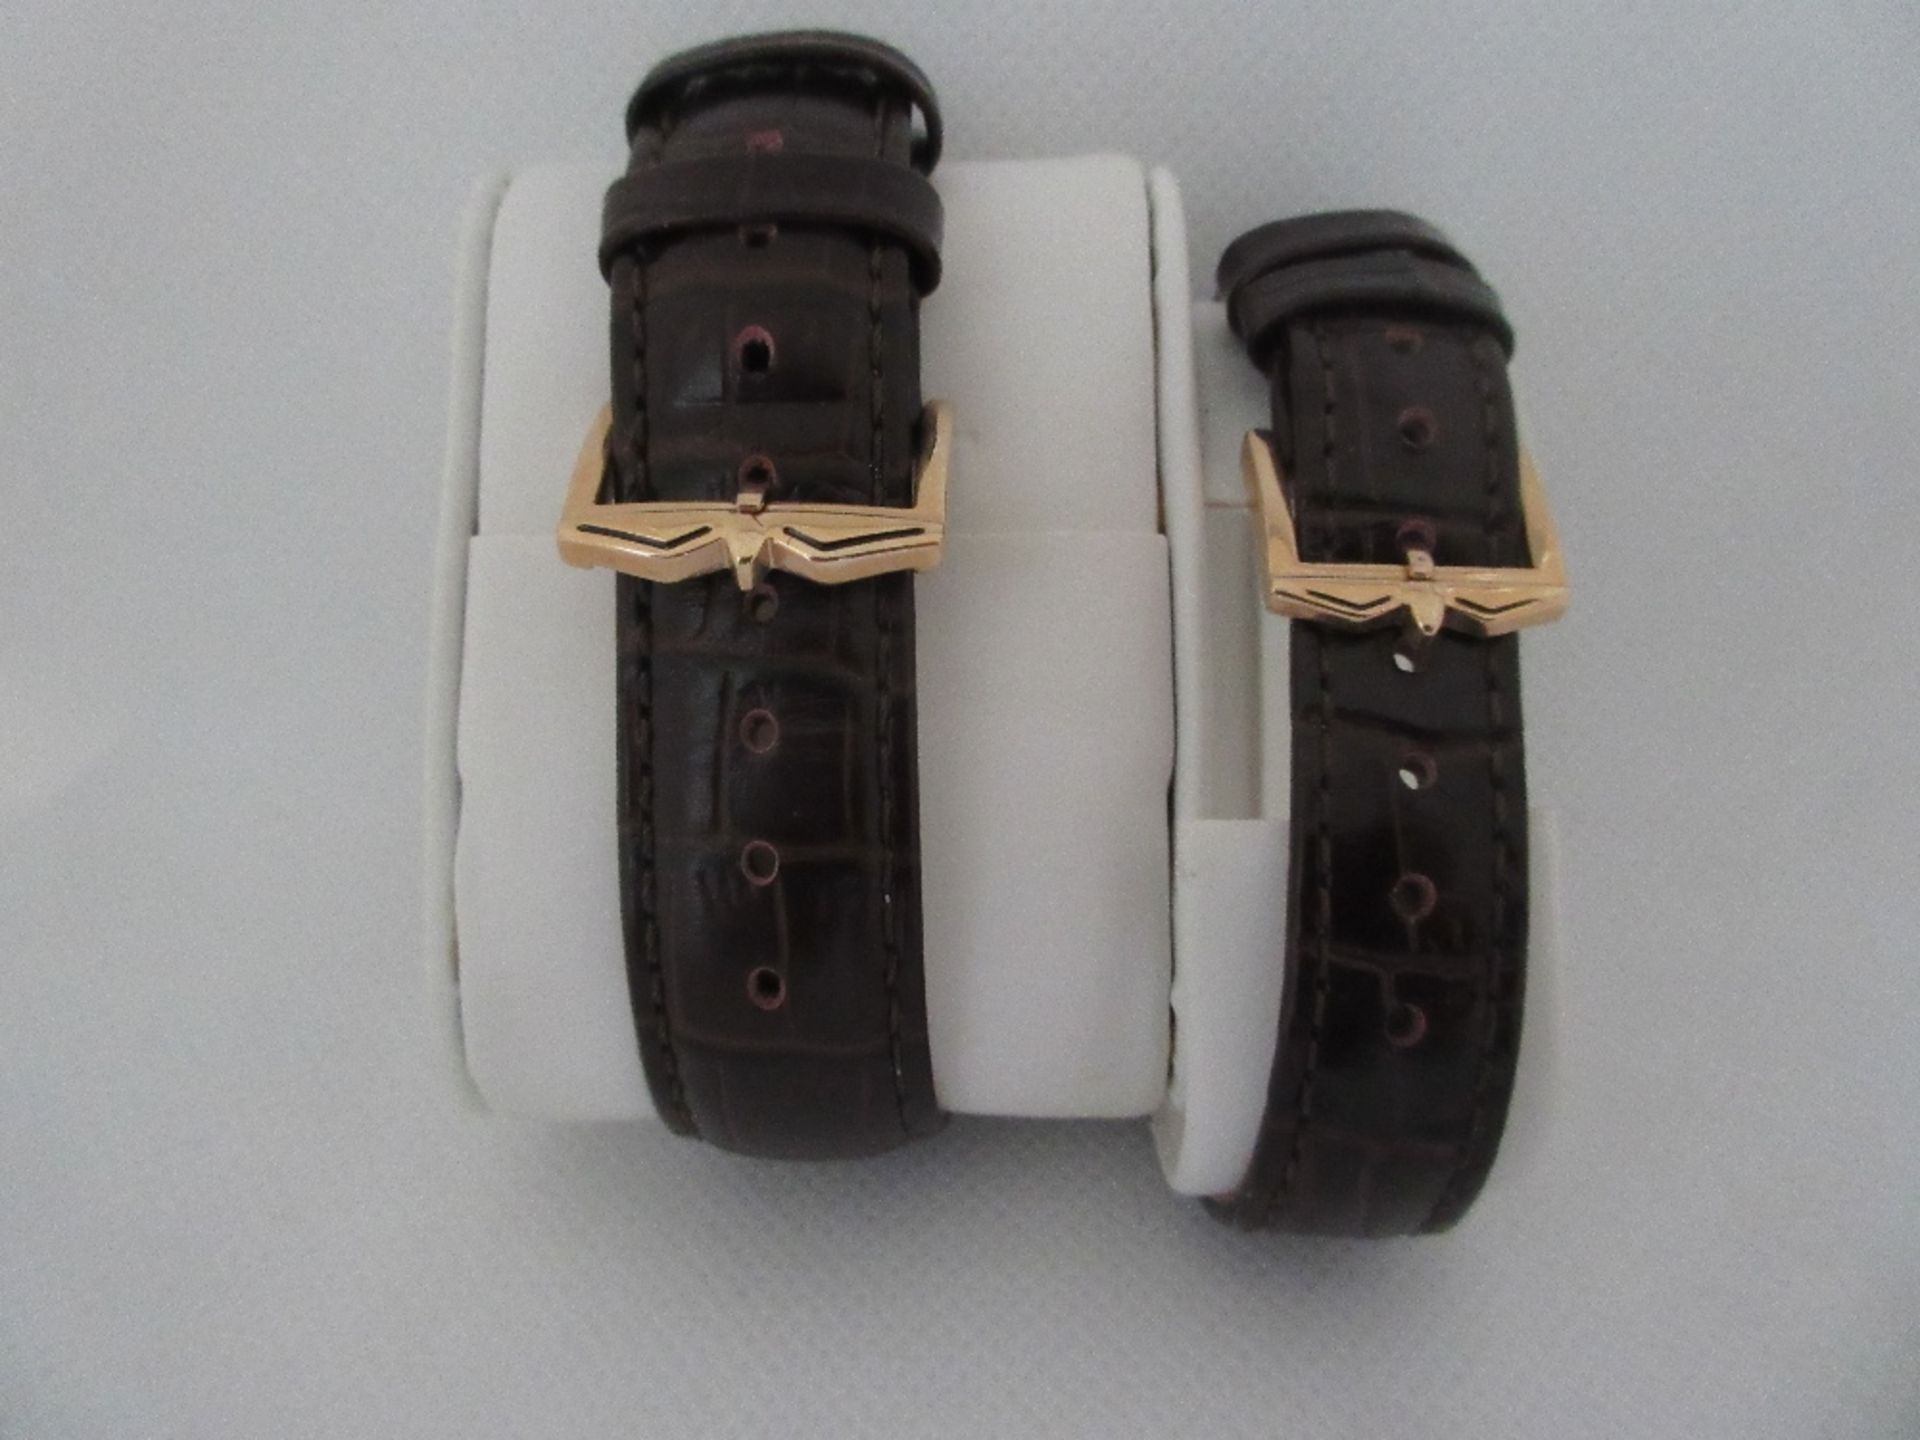 ROTARY SET WATCH, MODEL GS02699/01 & LS02699/01, CASE DIAMETER 29MM & 23MM, LEATHER STRAP, BOXED, - Image 2 of 4